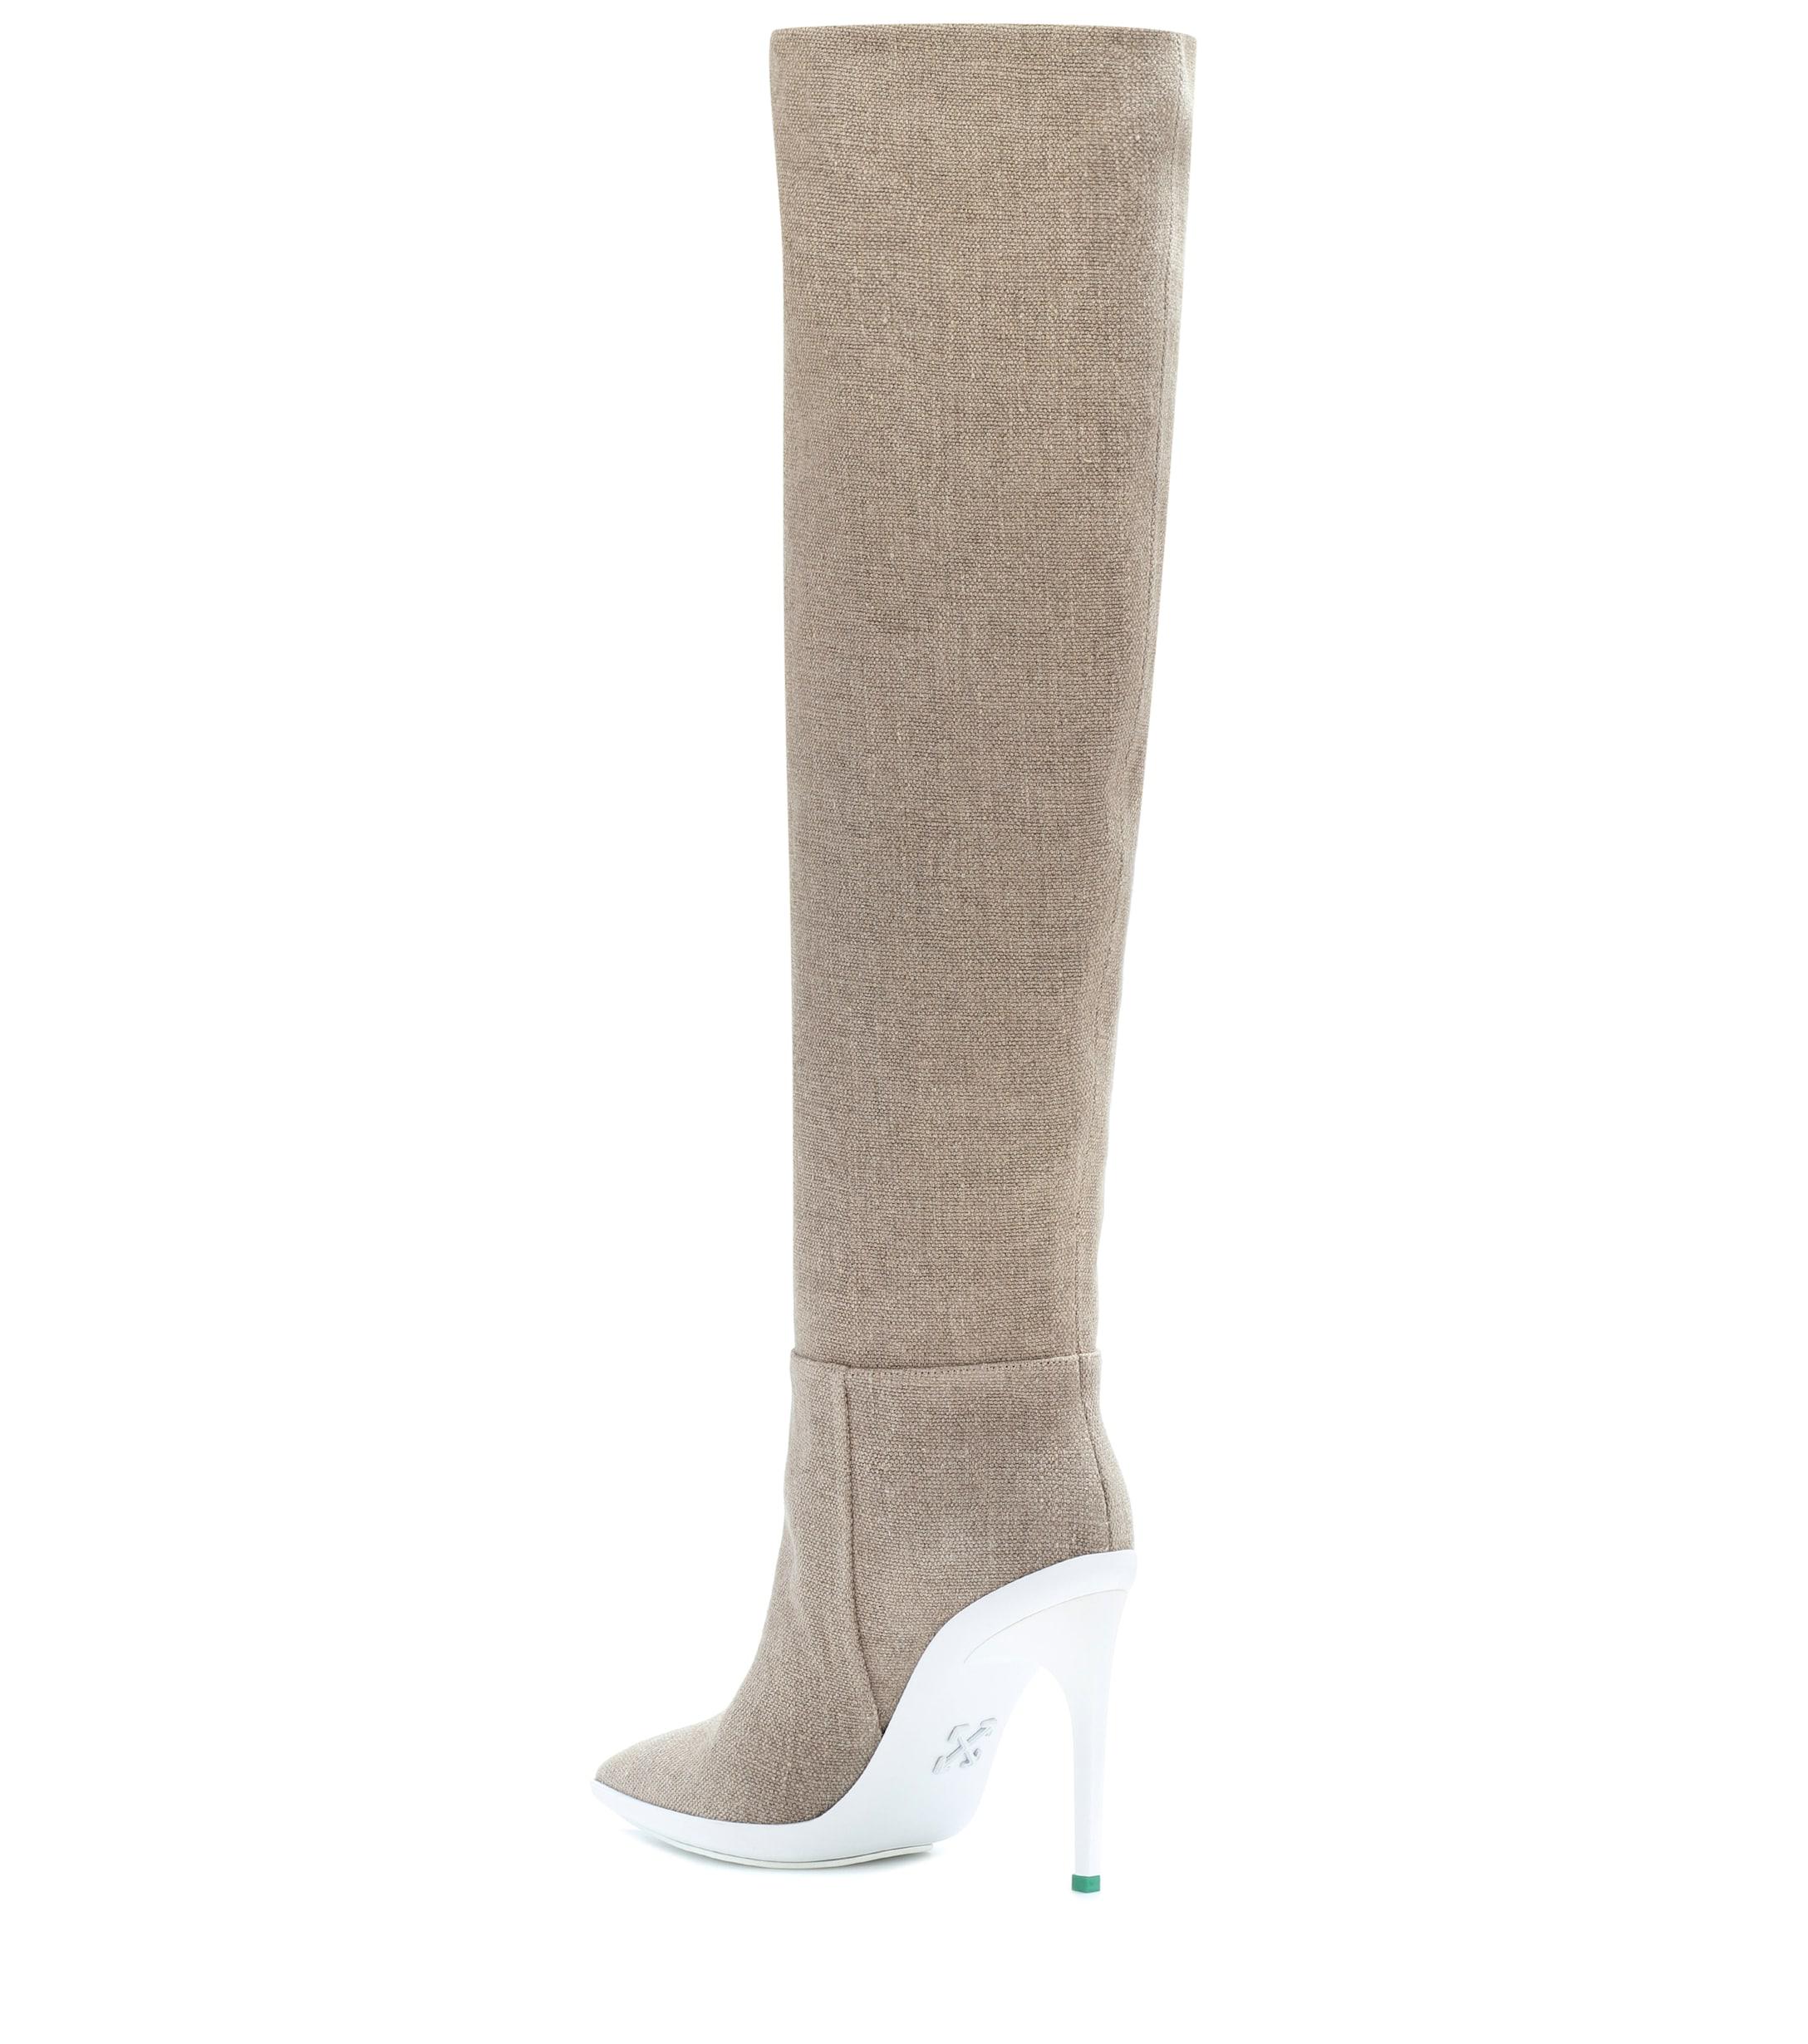 Off-White c/o Virgil Abloh For Walking Over-the-knee Boots in Beige ...